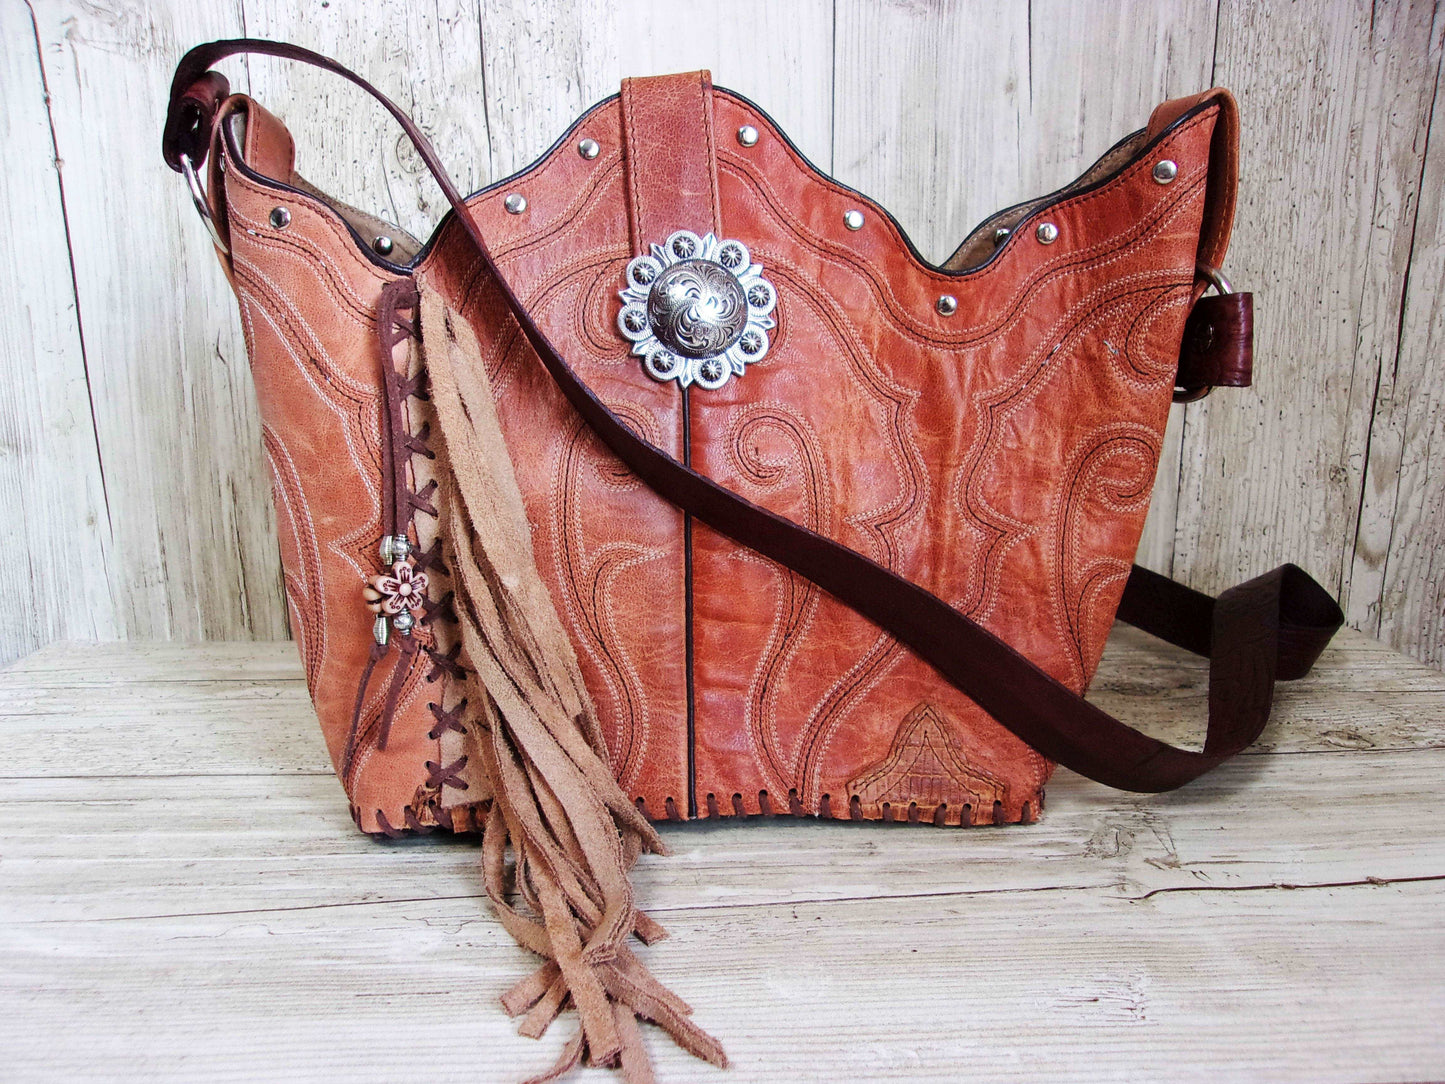 Bucket Bag Cowboy Boot Fringe Purse BK81 handcrafted from cowboy boots. Shop all unique leather western handbags, purses and totes at Chris Thompson Bags